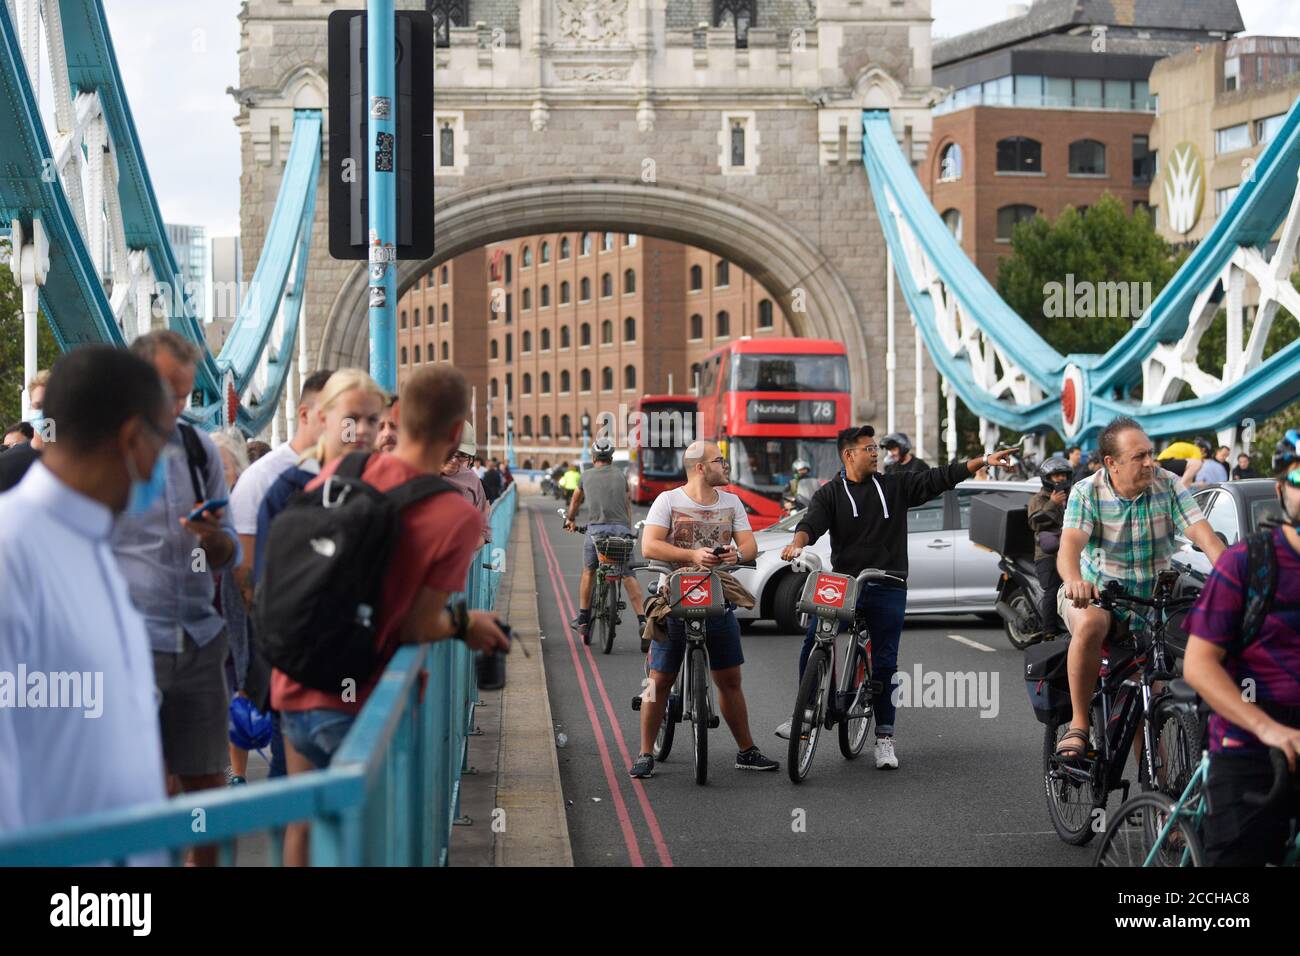 Traffic and pedestrians waiting on the approach to Tower Bridge in London, after the bridge became stuck open, causing traffic chaos. Stock Photo